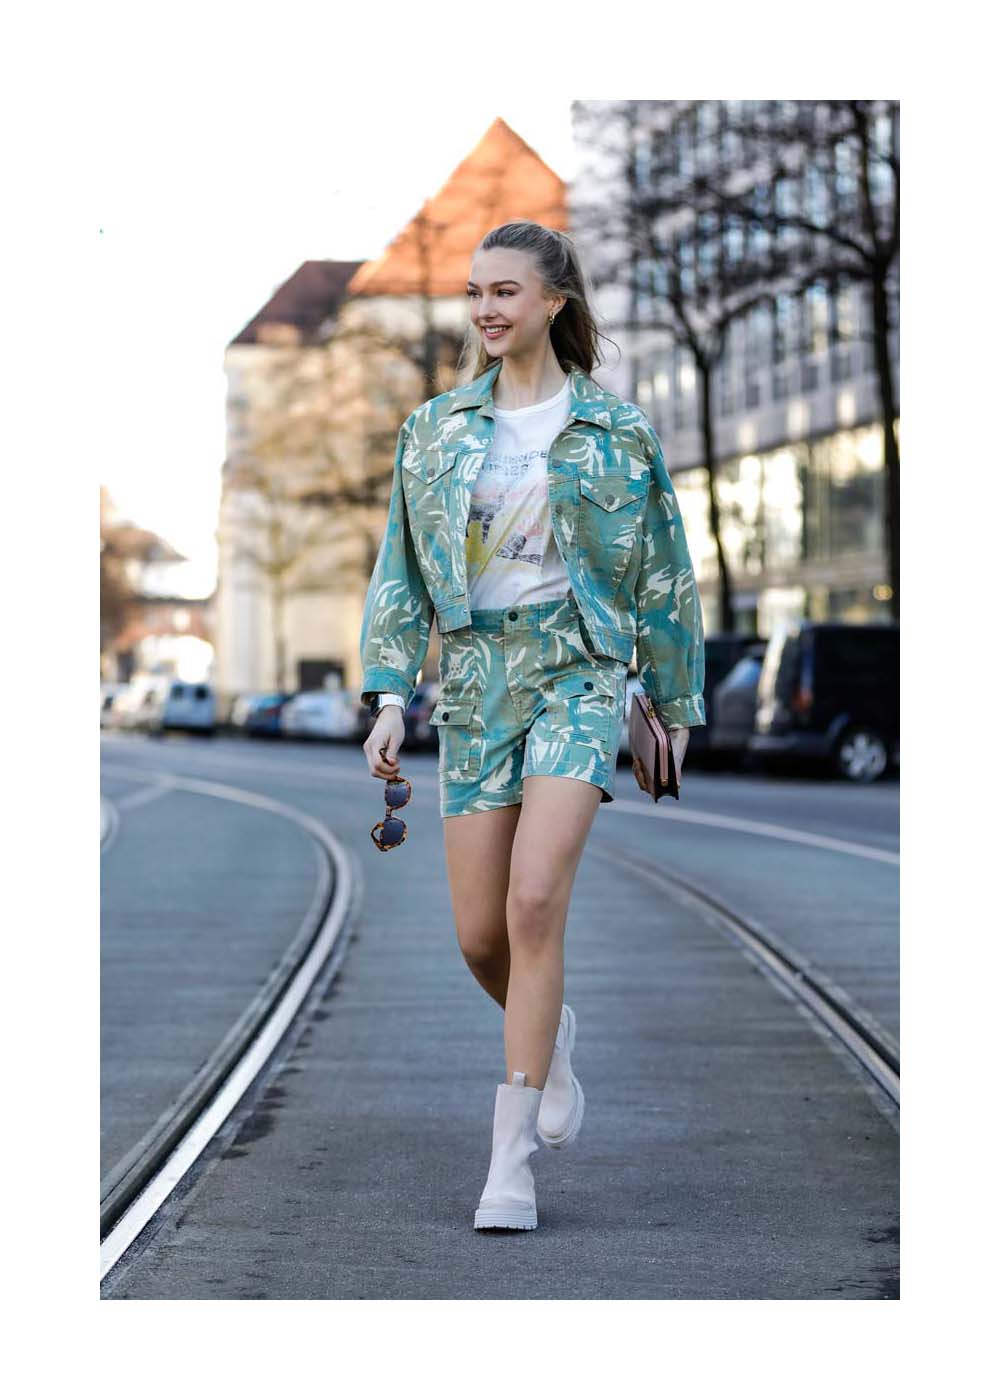 Lilly Krug Street Style Shooting In Munich